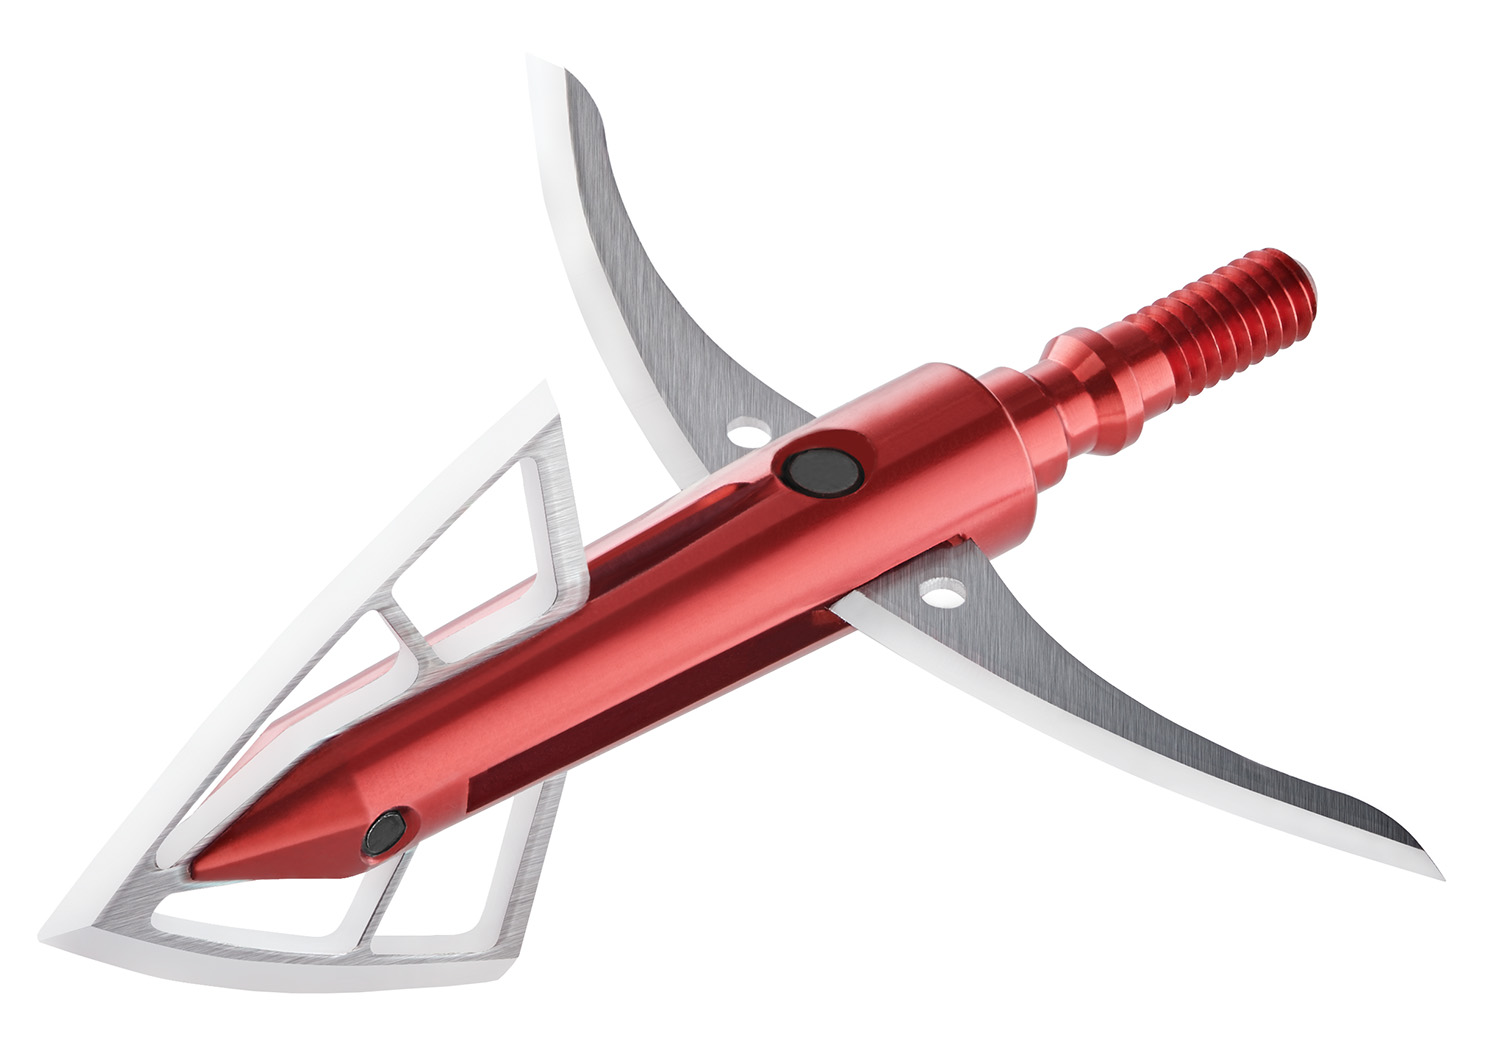 Bloodsport BLS10821 Gravedigger Extreme Broadhead Hybrid Mechanical Cut-On-Contact Tip Stainless Steel Blades Red 100 gr 3 Broadheads